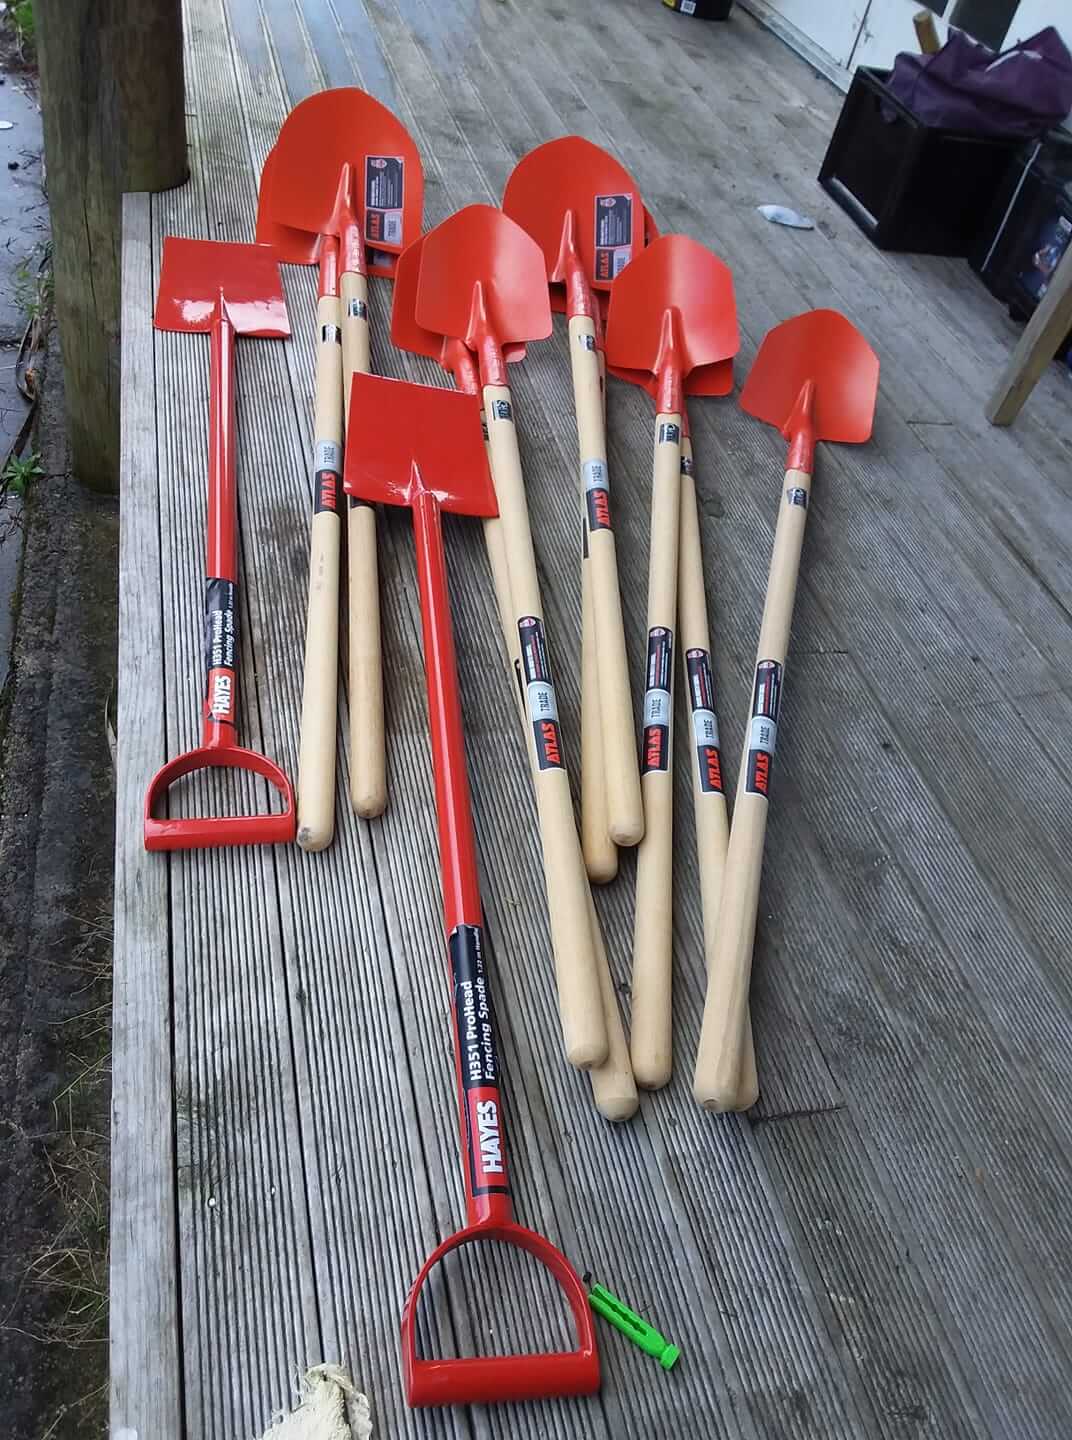 Thank you again goes out to Sharlene Wells and her whanau for purchasing these for Mareitu. Here are the spades and shovels for Mareitu. 2 long handled pro head spades, 4 large shovels for back fill, and 4 small shovels. An extra 1 was bought as there was extra money because we changed1 of the spades for a longer handled 1. I spoke with Sharlene Wells about the extra money and she said I could use it whichever way I saw fit.